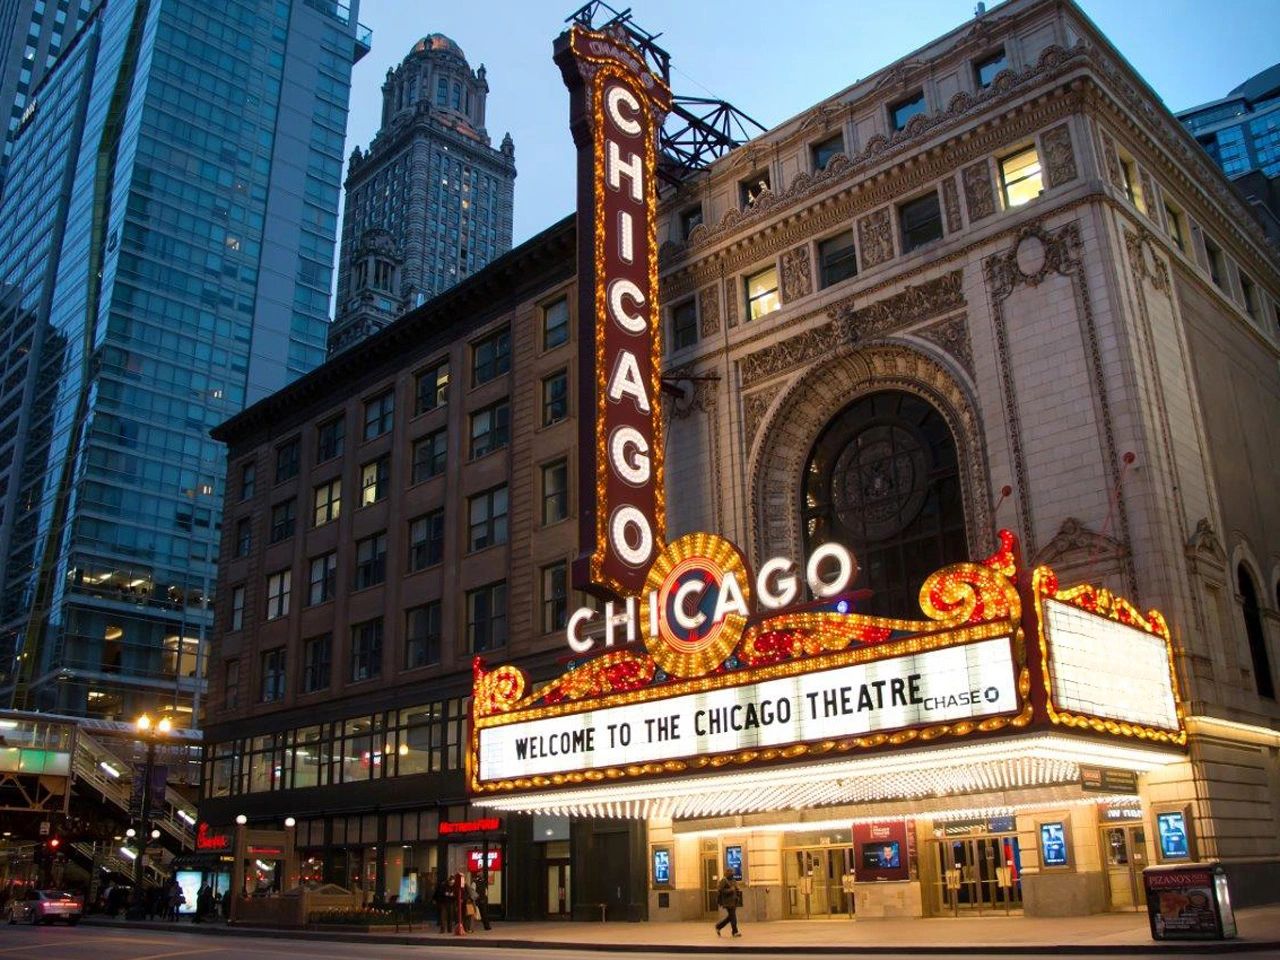 Bus Charters VIP Chicago. Best Chicago Charter Bus & minibus Rentals Transportation Company for tour